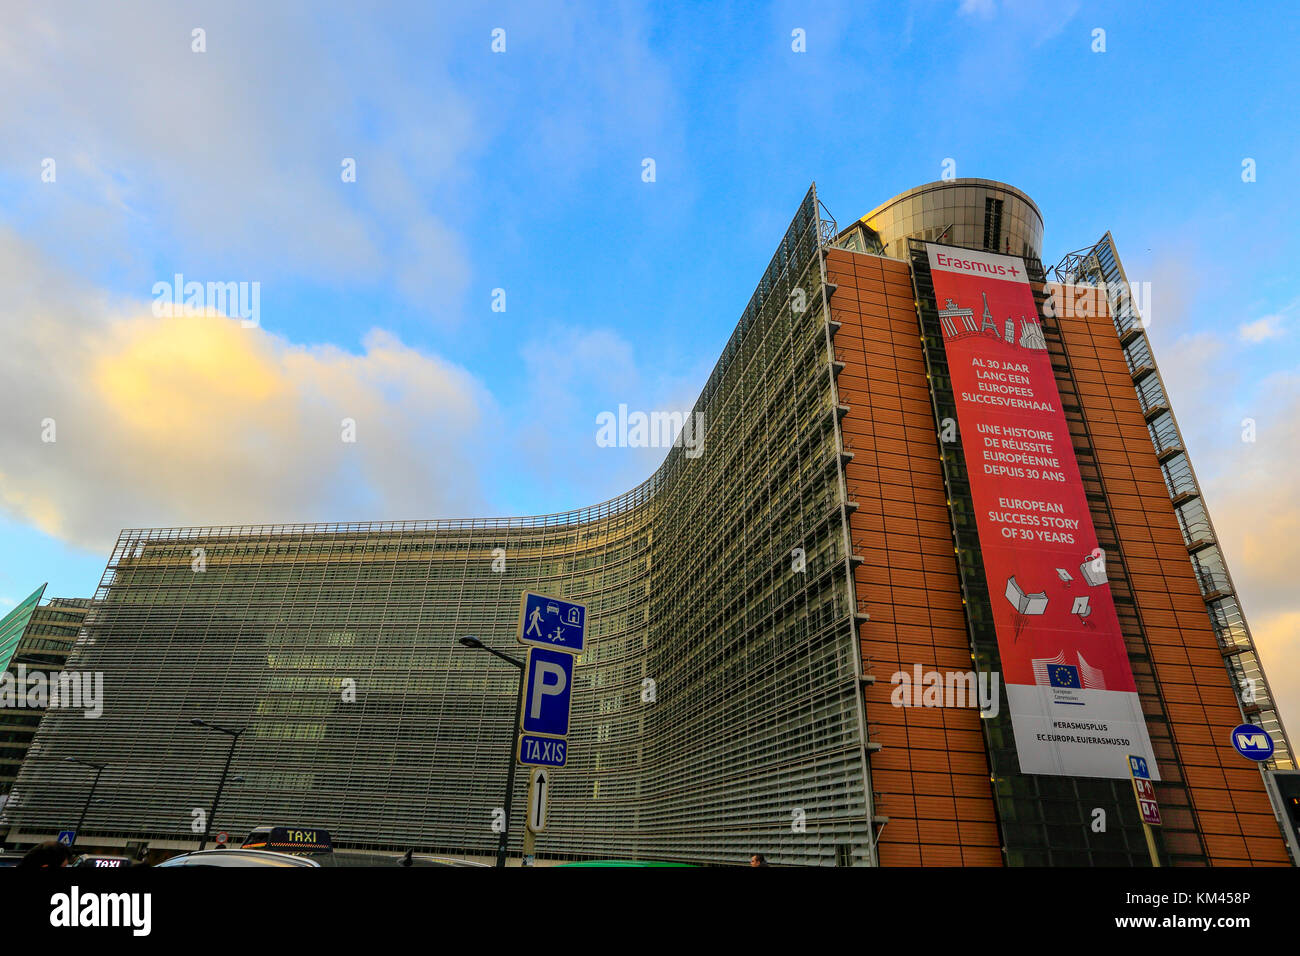 The Berlaymont building in Brussels, Belgium. That houses the headquarters of the European Commission, which is the executive of the European Union. Stock Photo